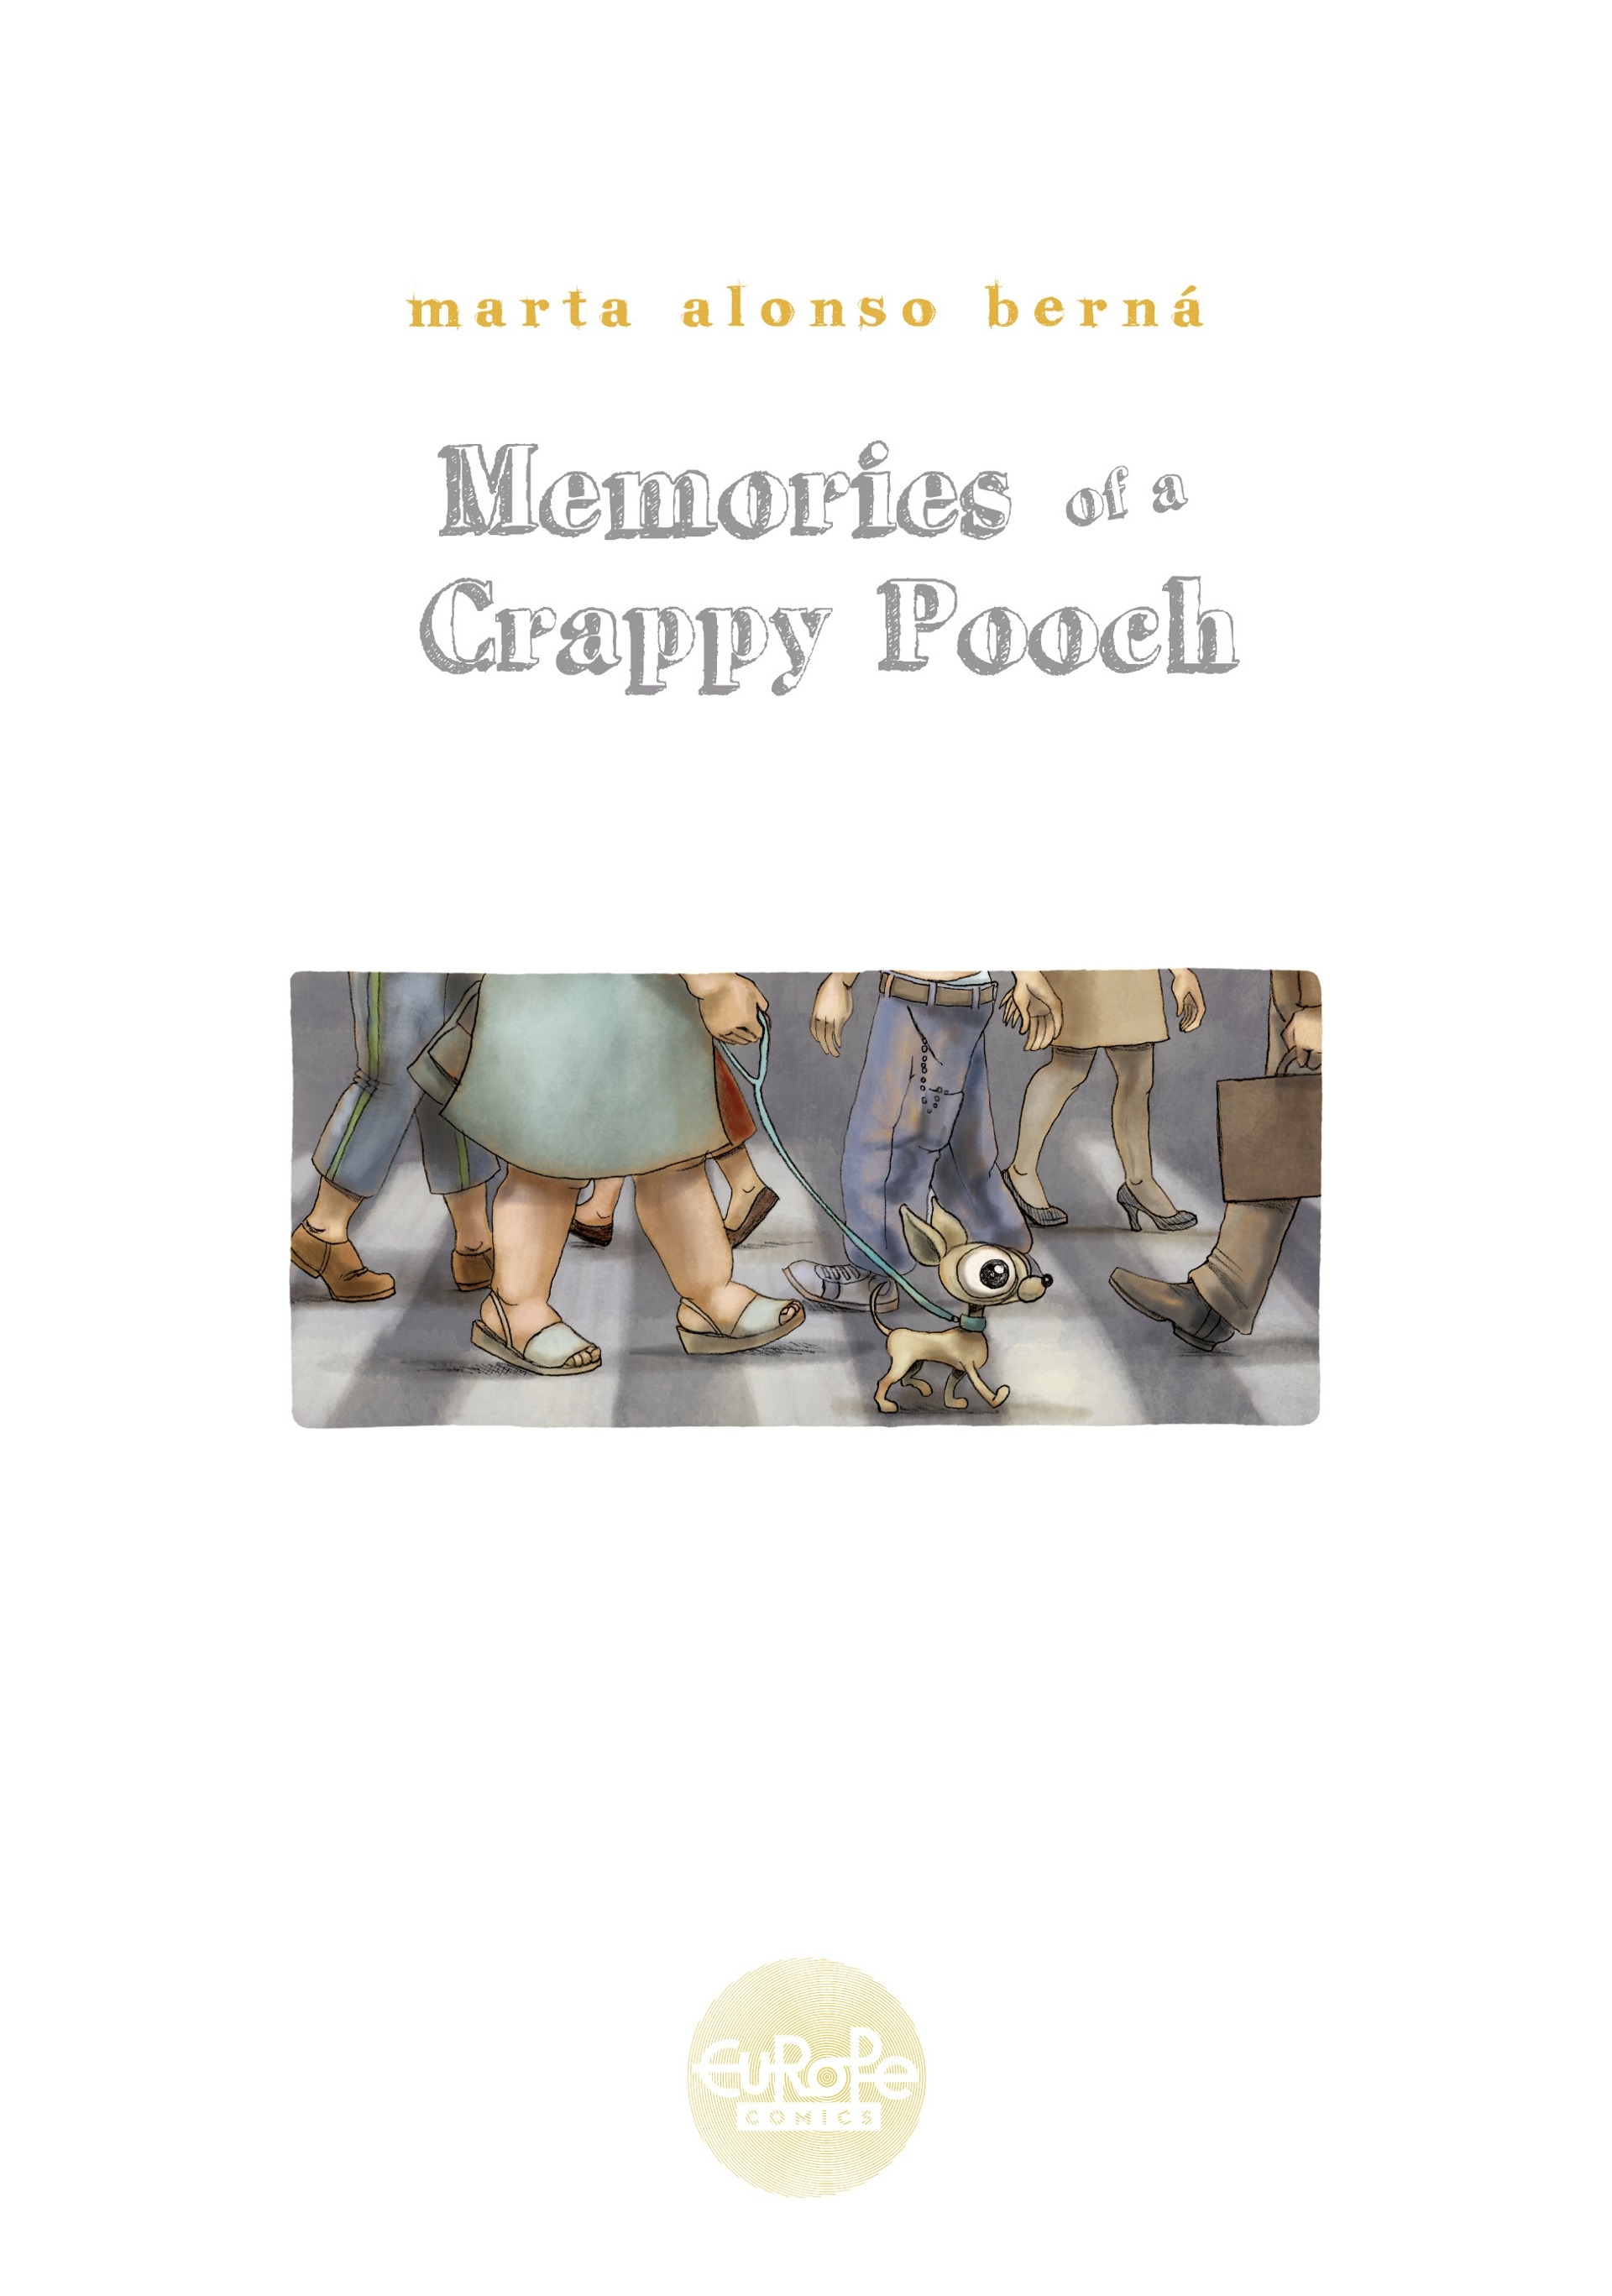 Read online Memories of a Crappy Pooch comic -  Issue # TPB - 3